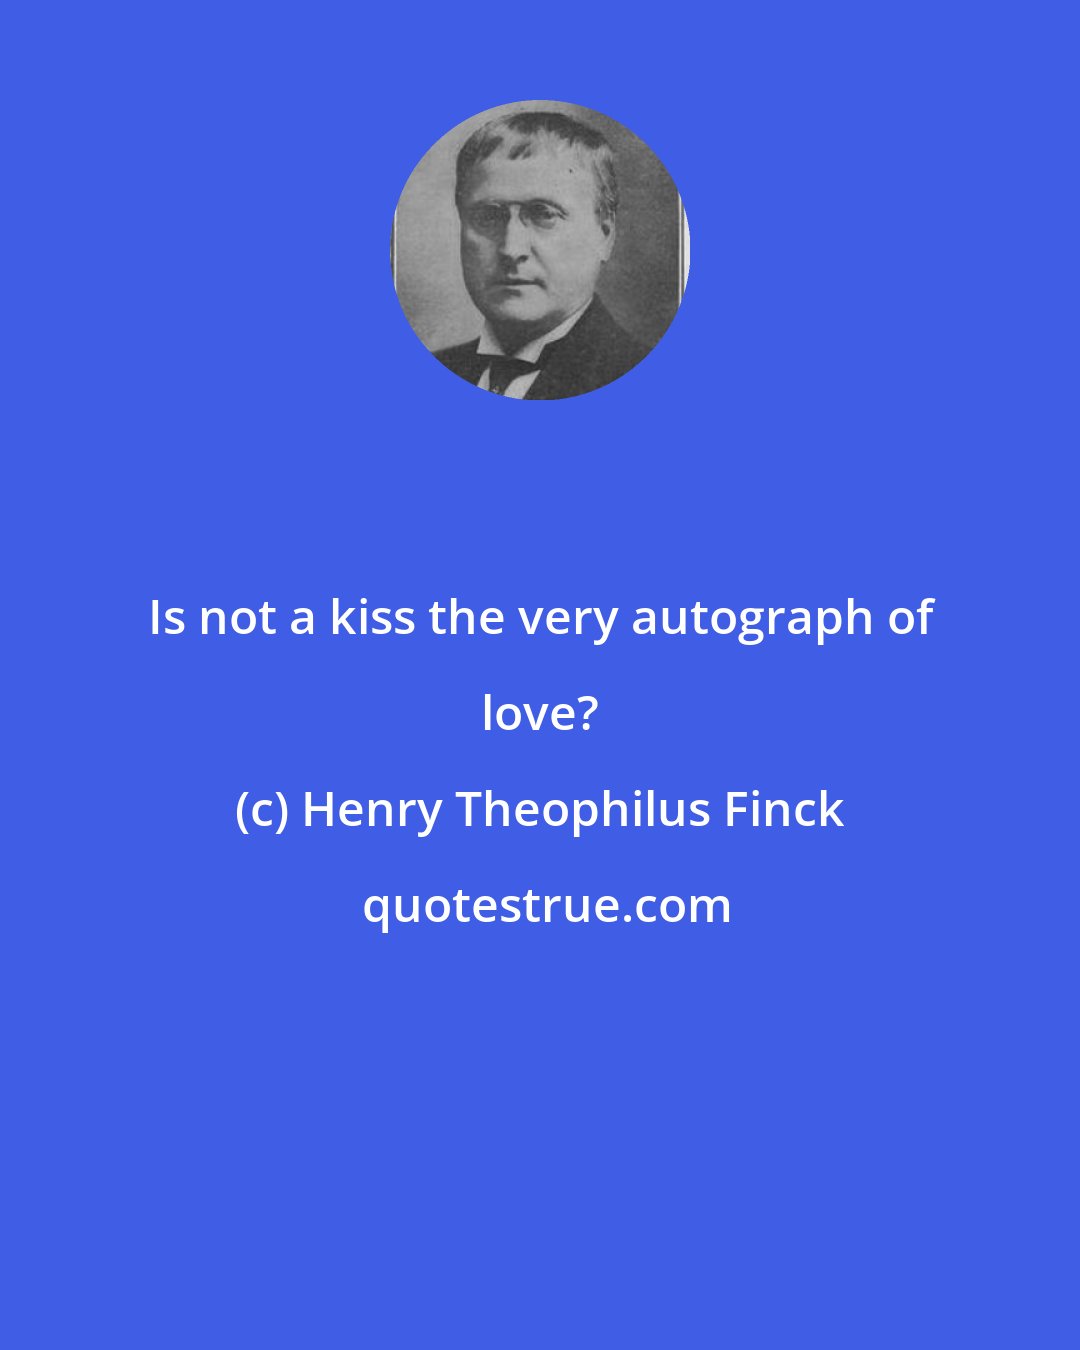 Henry Theophilus Finck: Is not a kiss the very autograph of love?